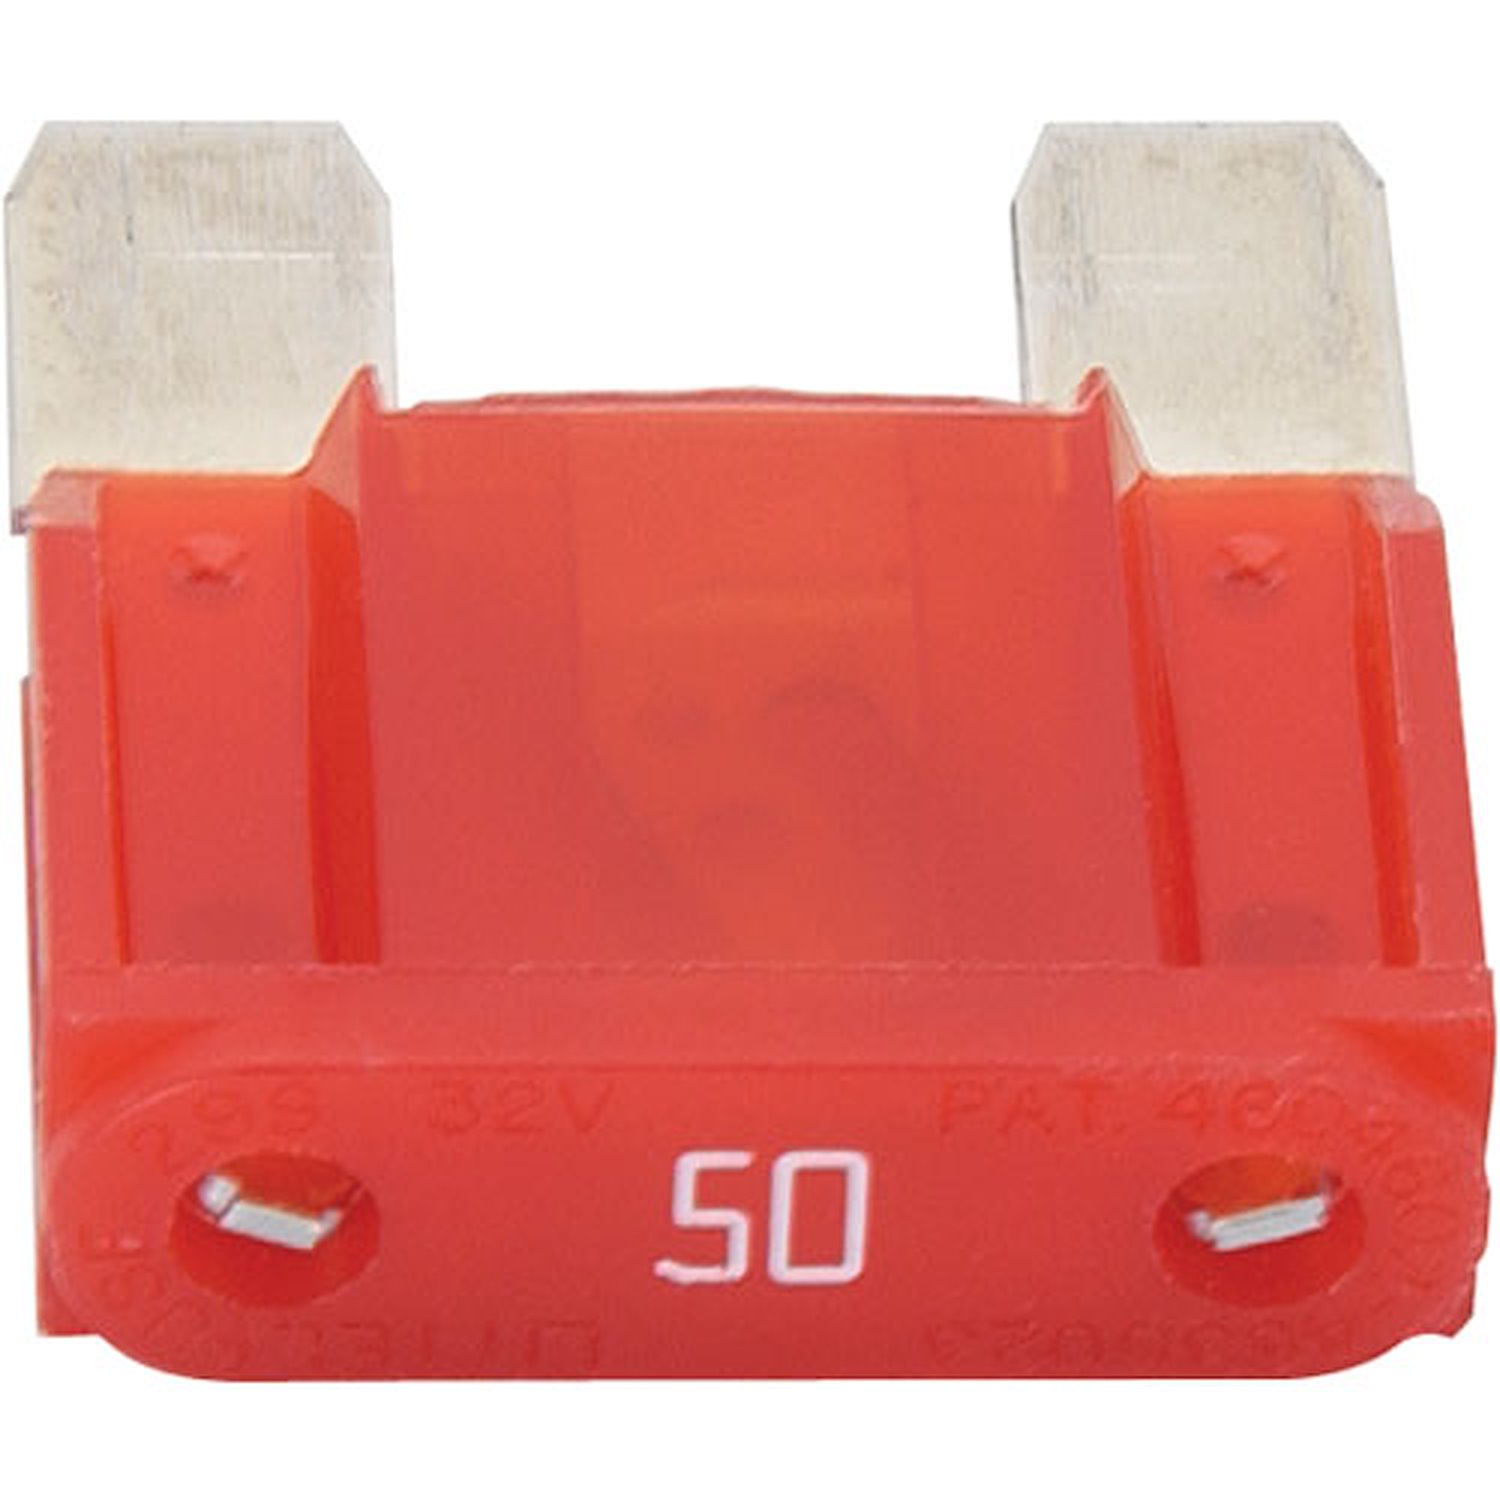 50 Amp Replacement Fuse For #555-10520